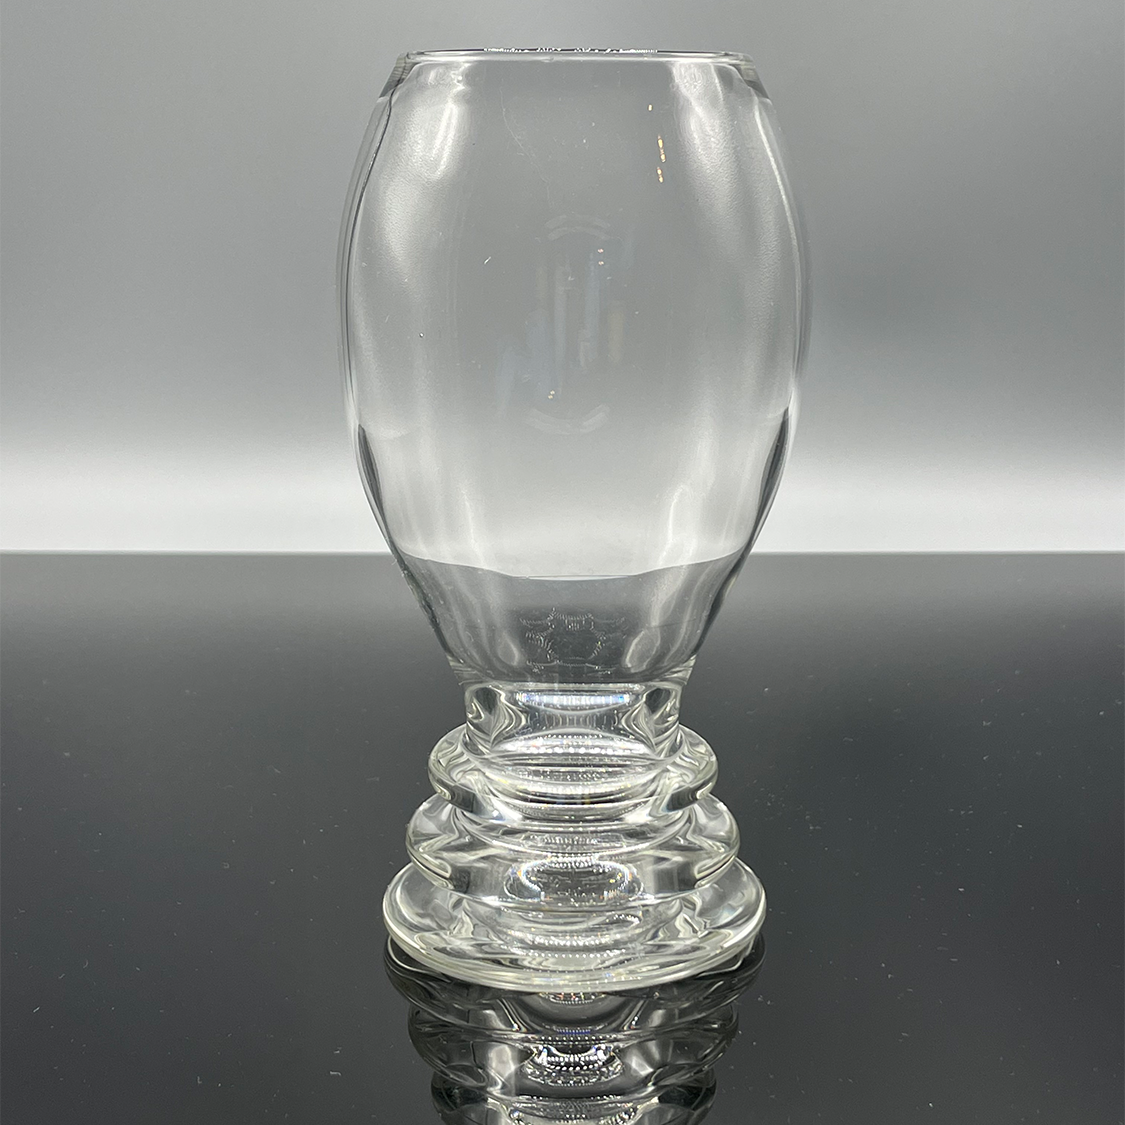 16 ounce beer glass with a ribbed base.